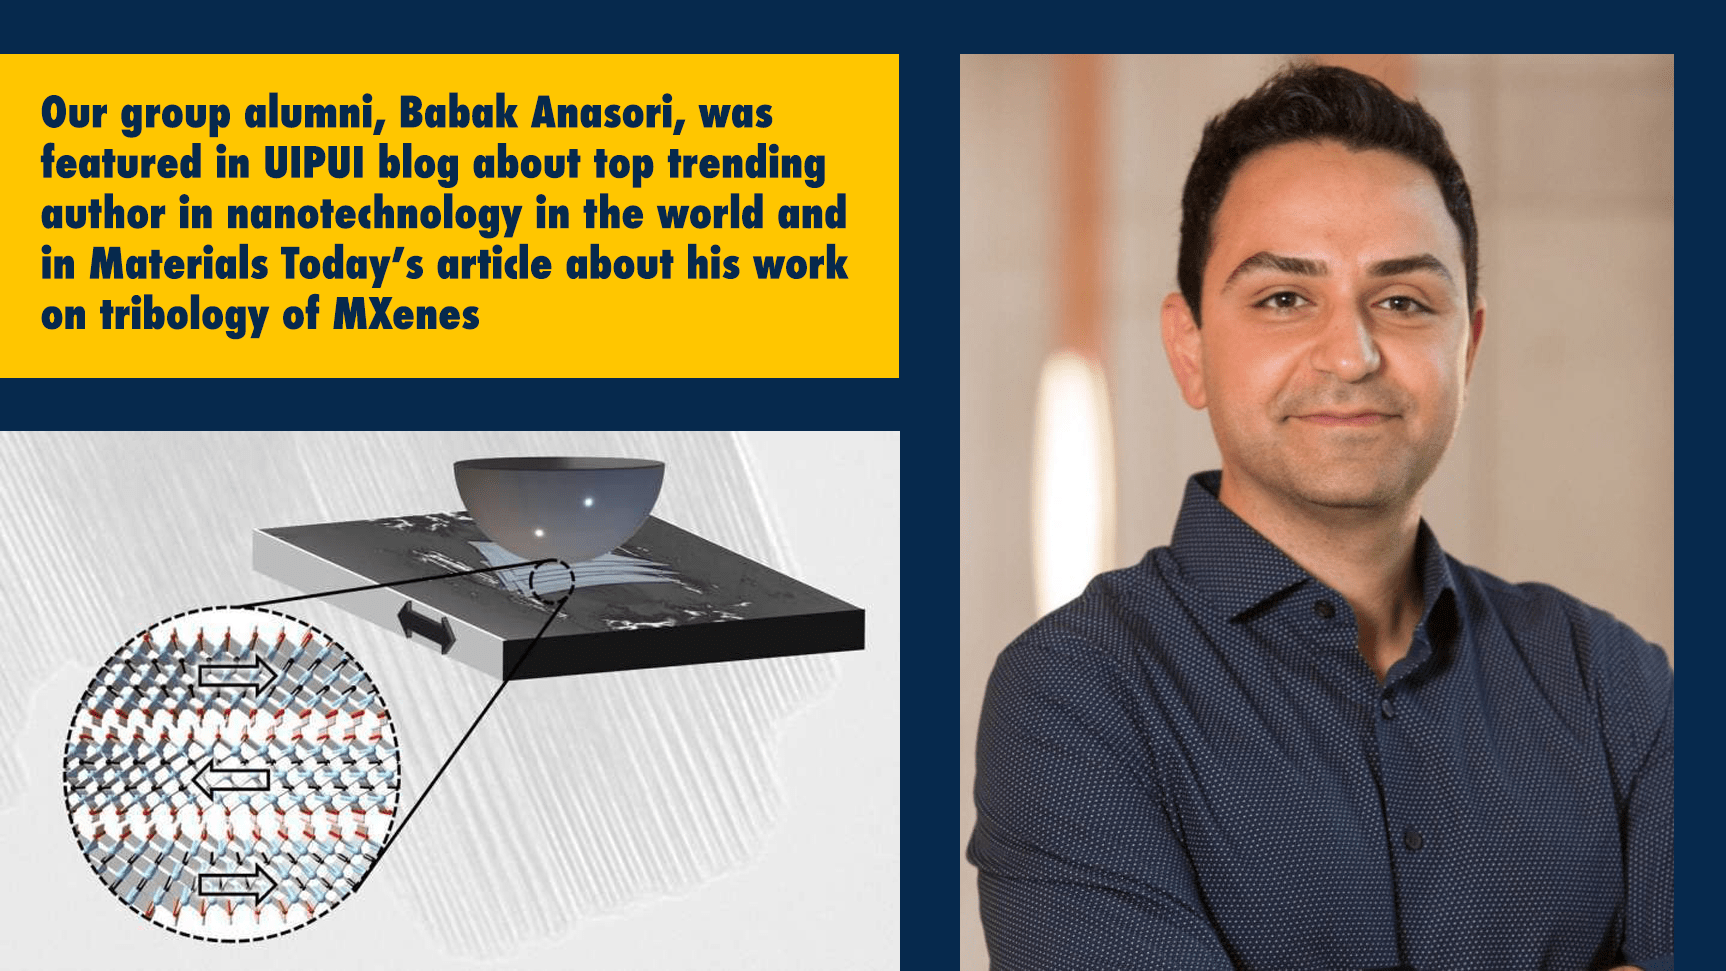 Our Group Alumni, Babak Anasori, Featured in UIPUI Blog About Top Trending Author in Nanotechnology in the World and in Materials Today’s Article about His Work on Tribology of MXenes